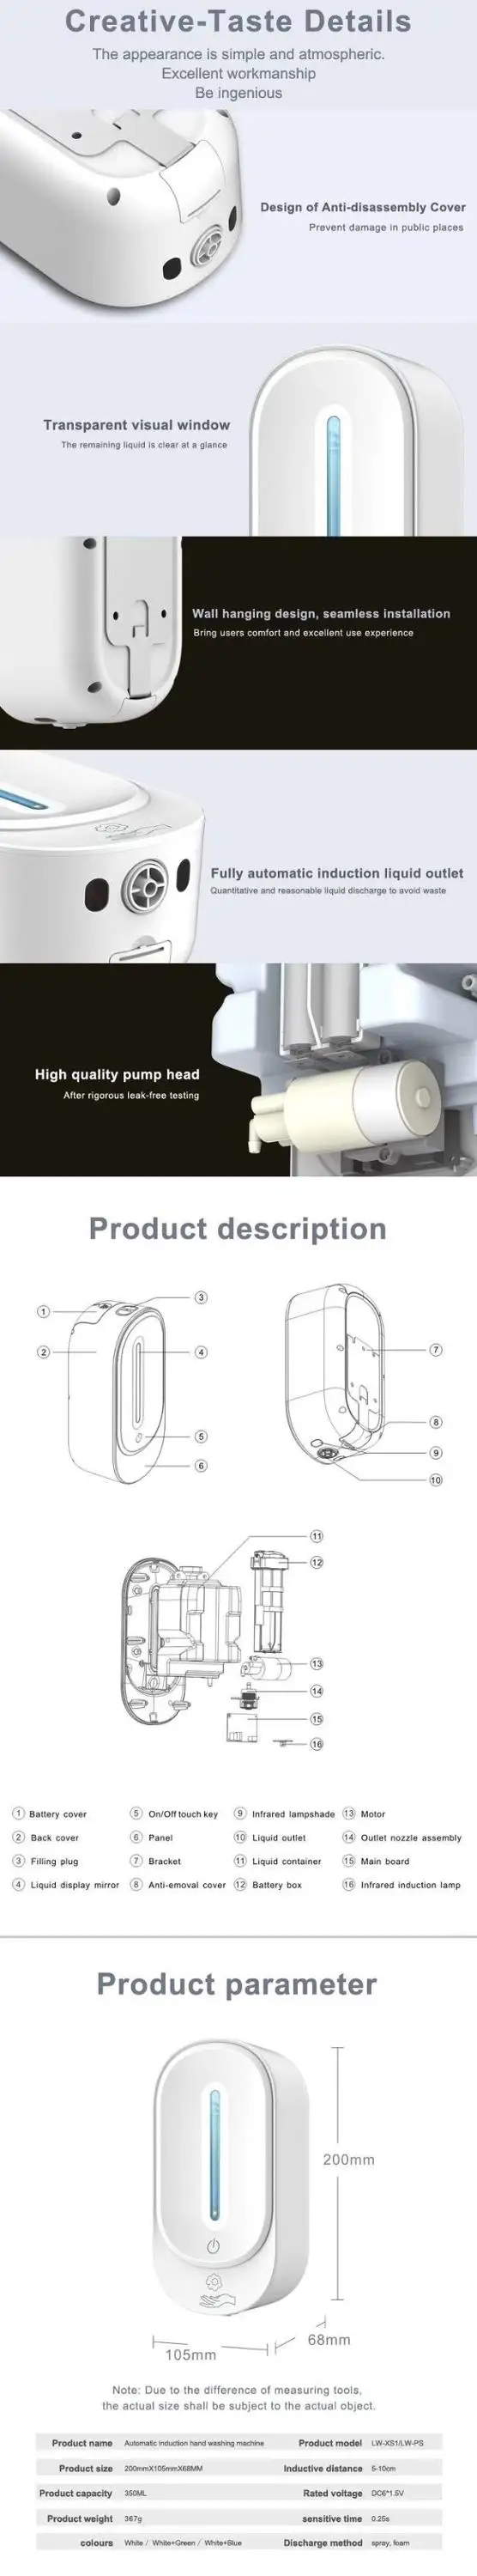 Intelligent infrared induction type automatic foam disinfection hand washing machine